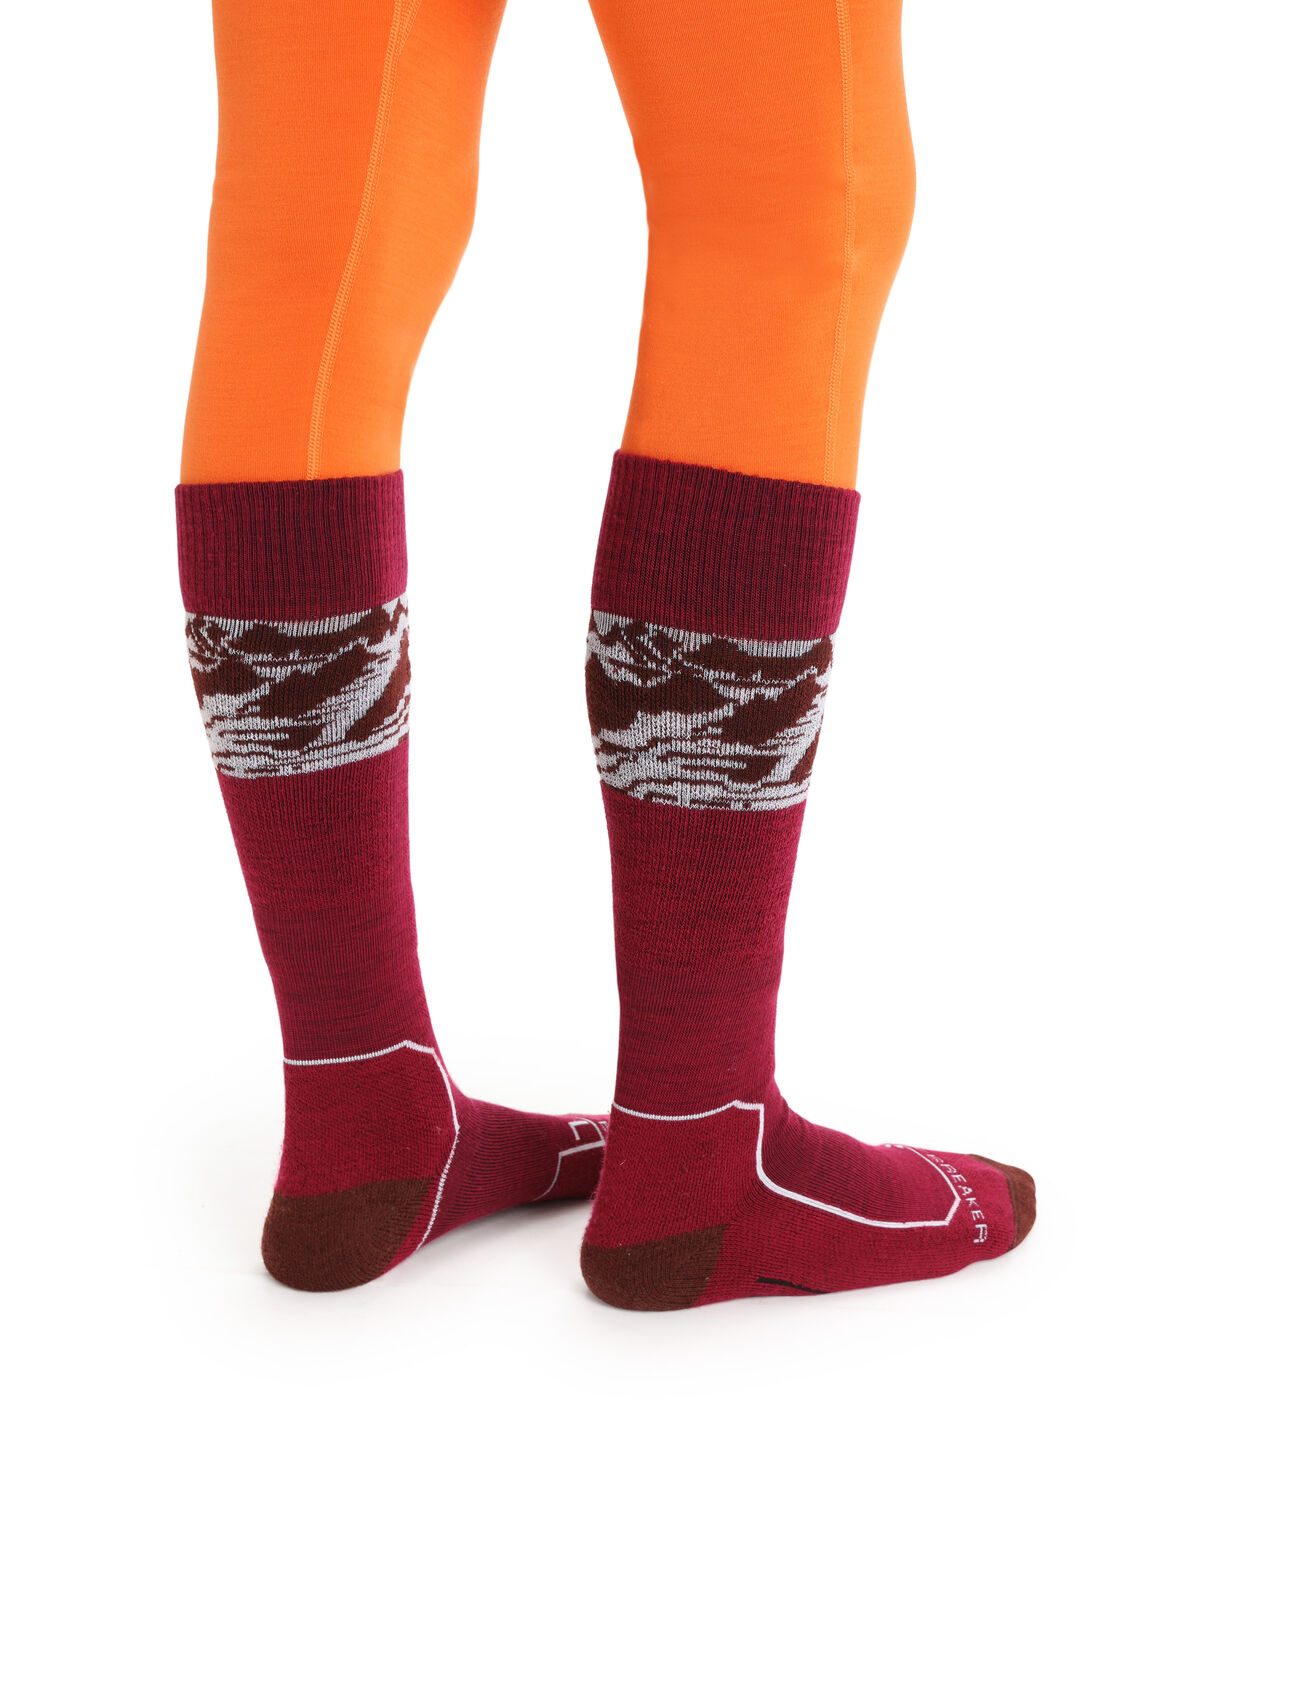 Womens Merino Ski+ Light Over the Calf Alps 3D Lightly cushioned ski socks for skiing the resort or the backcountry, the Ski+ Light Over the Calf Alps 3D socks are made with a durable, breathable merino wool blend.